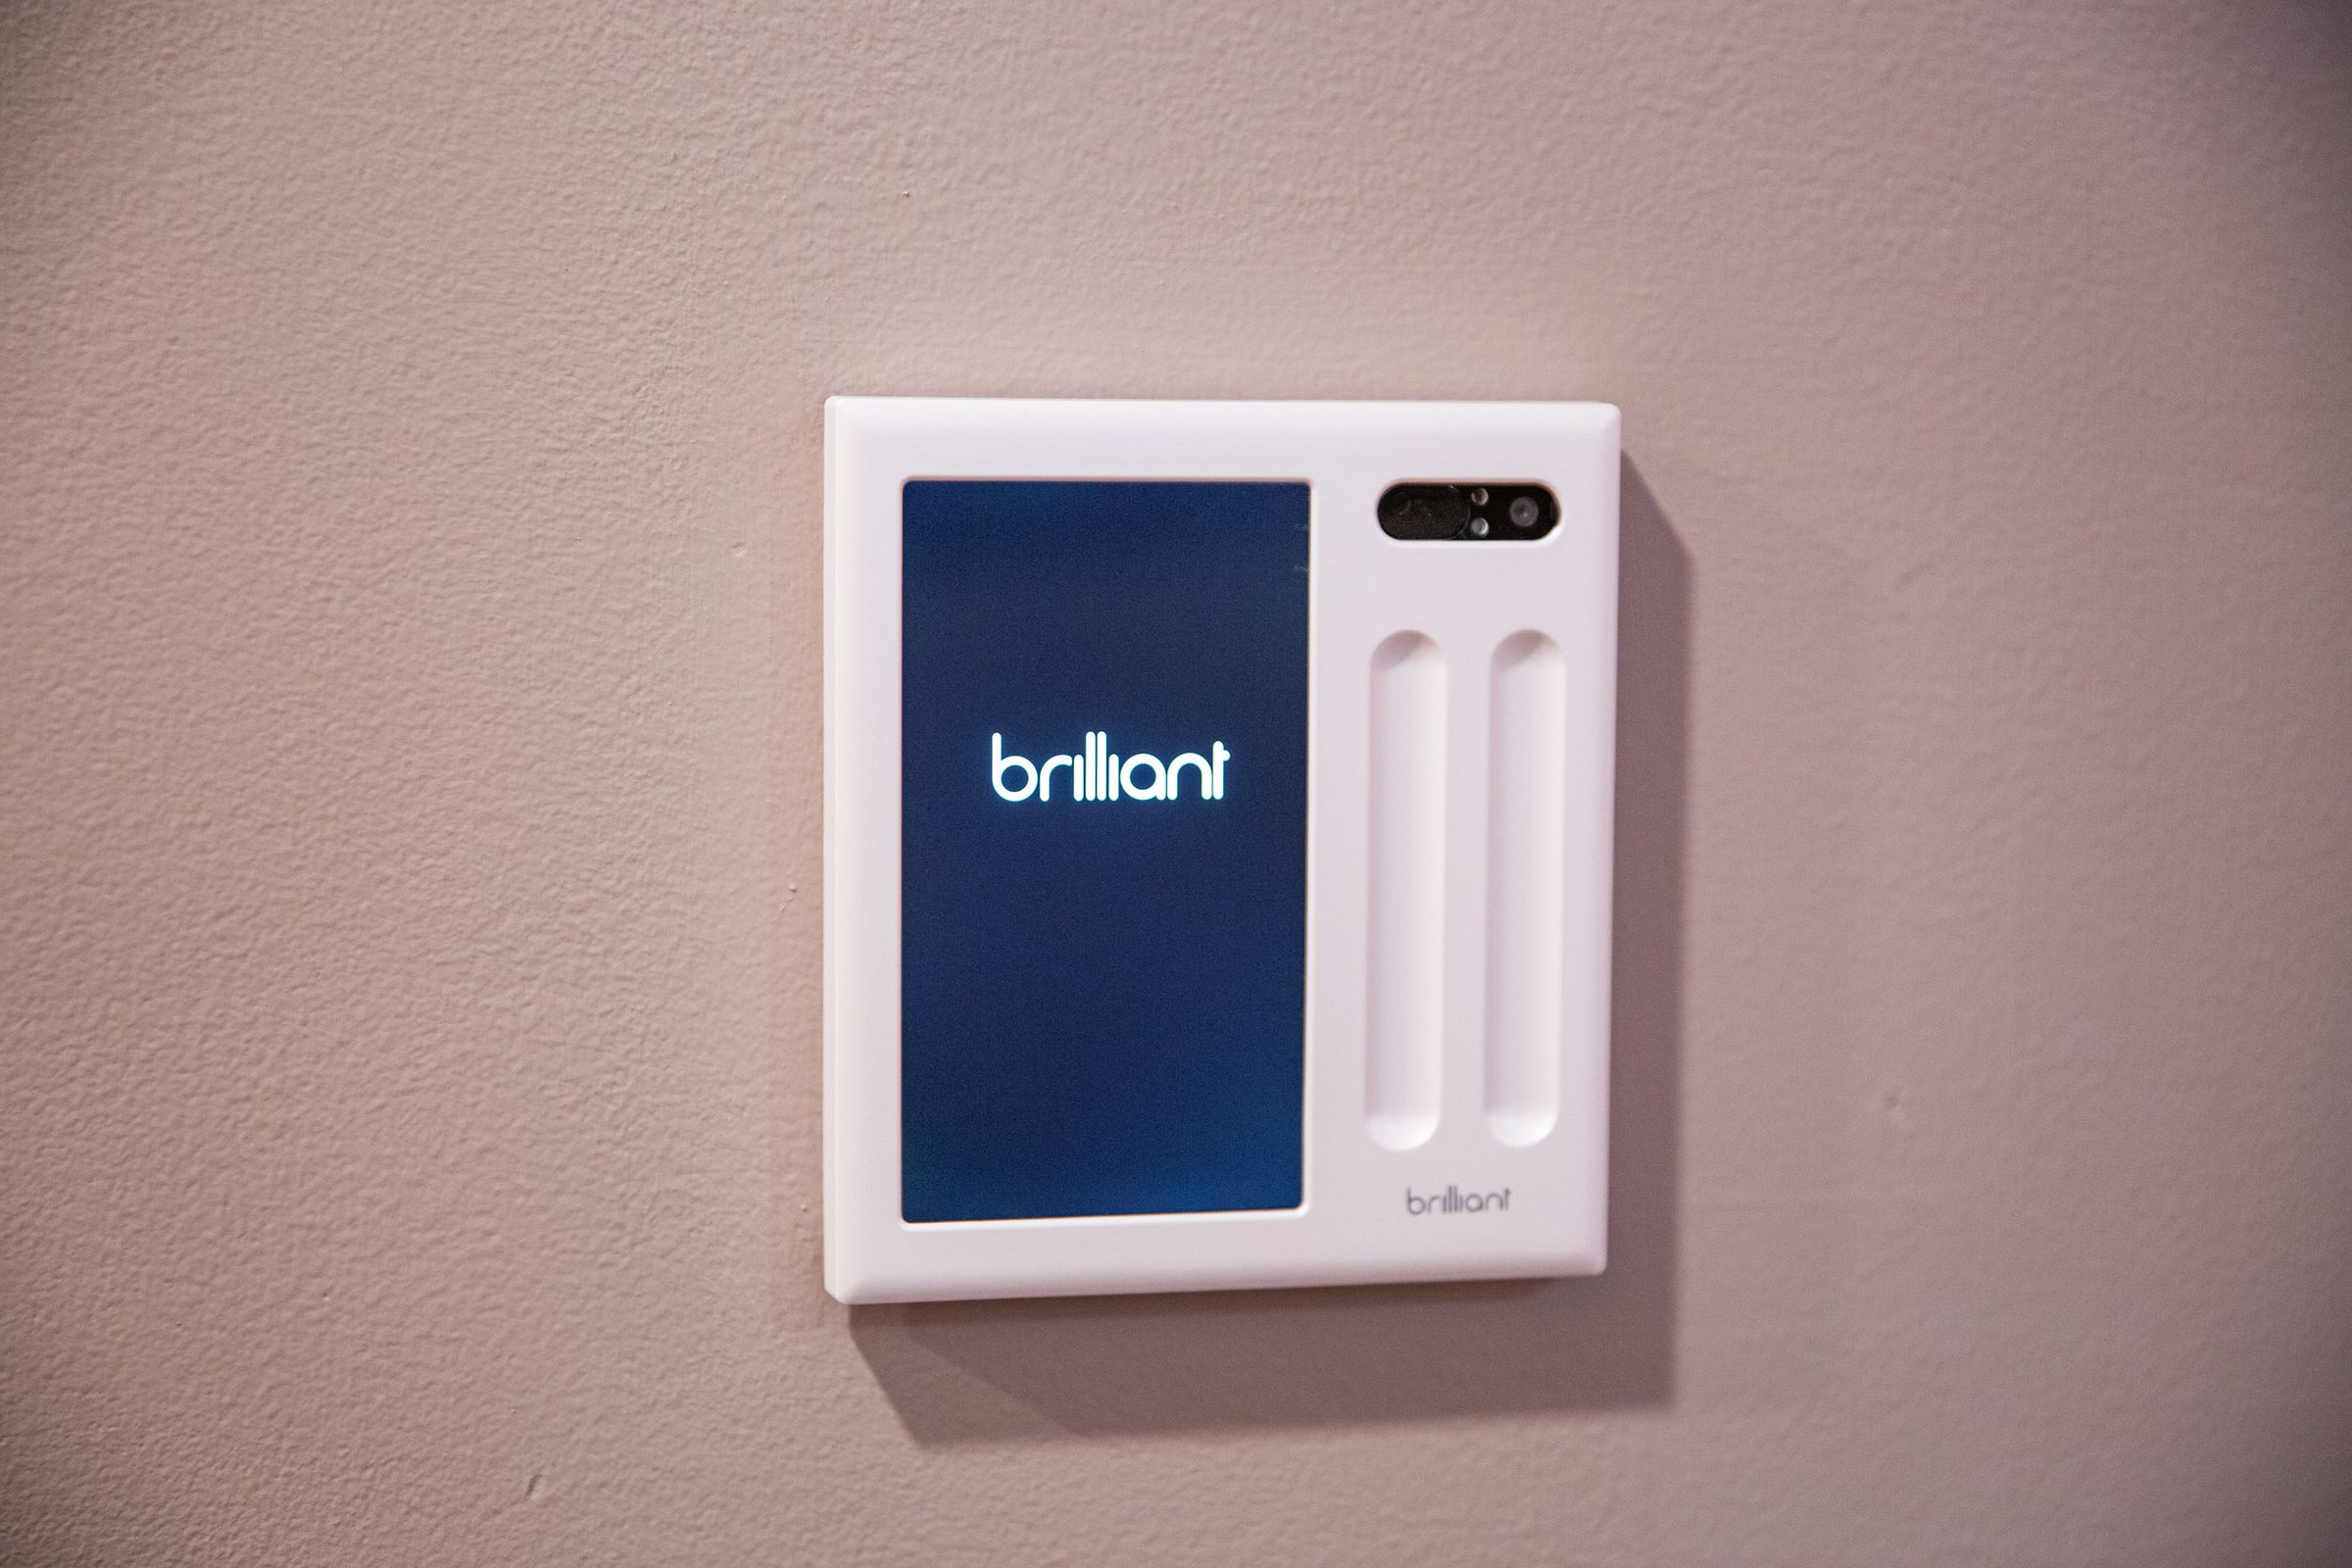 A touchscreen smart home panel on a wall with the word Brilliant displayed.